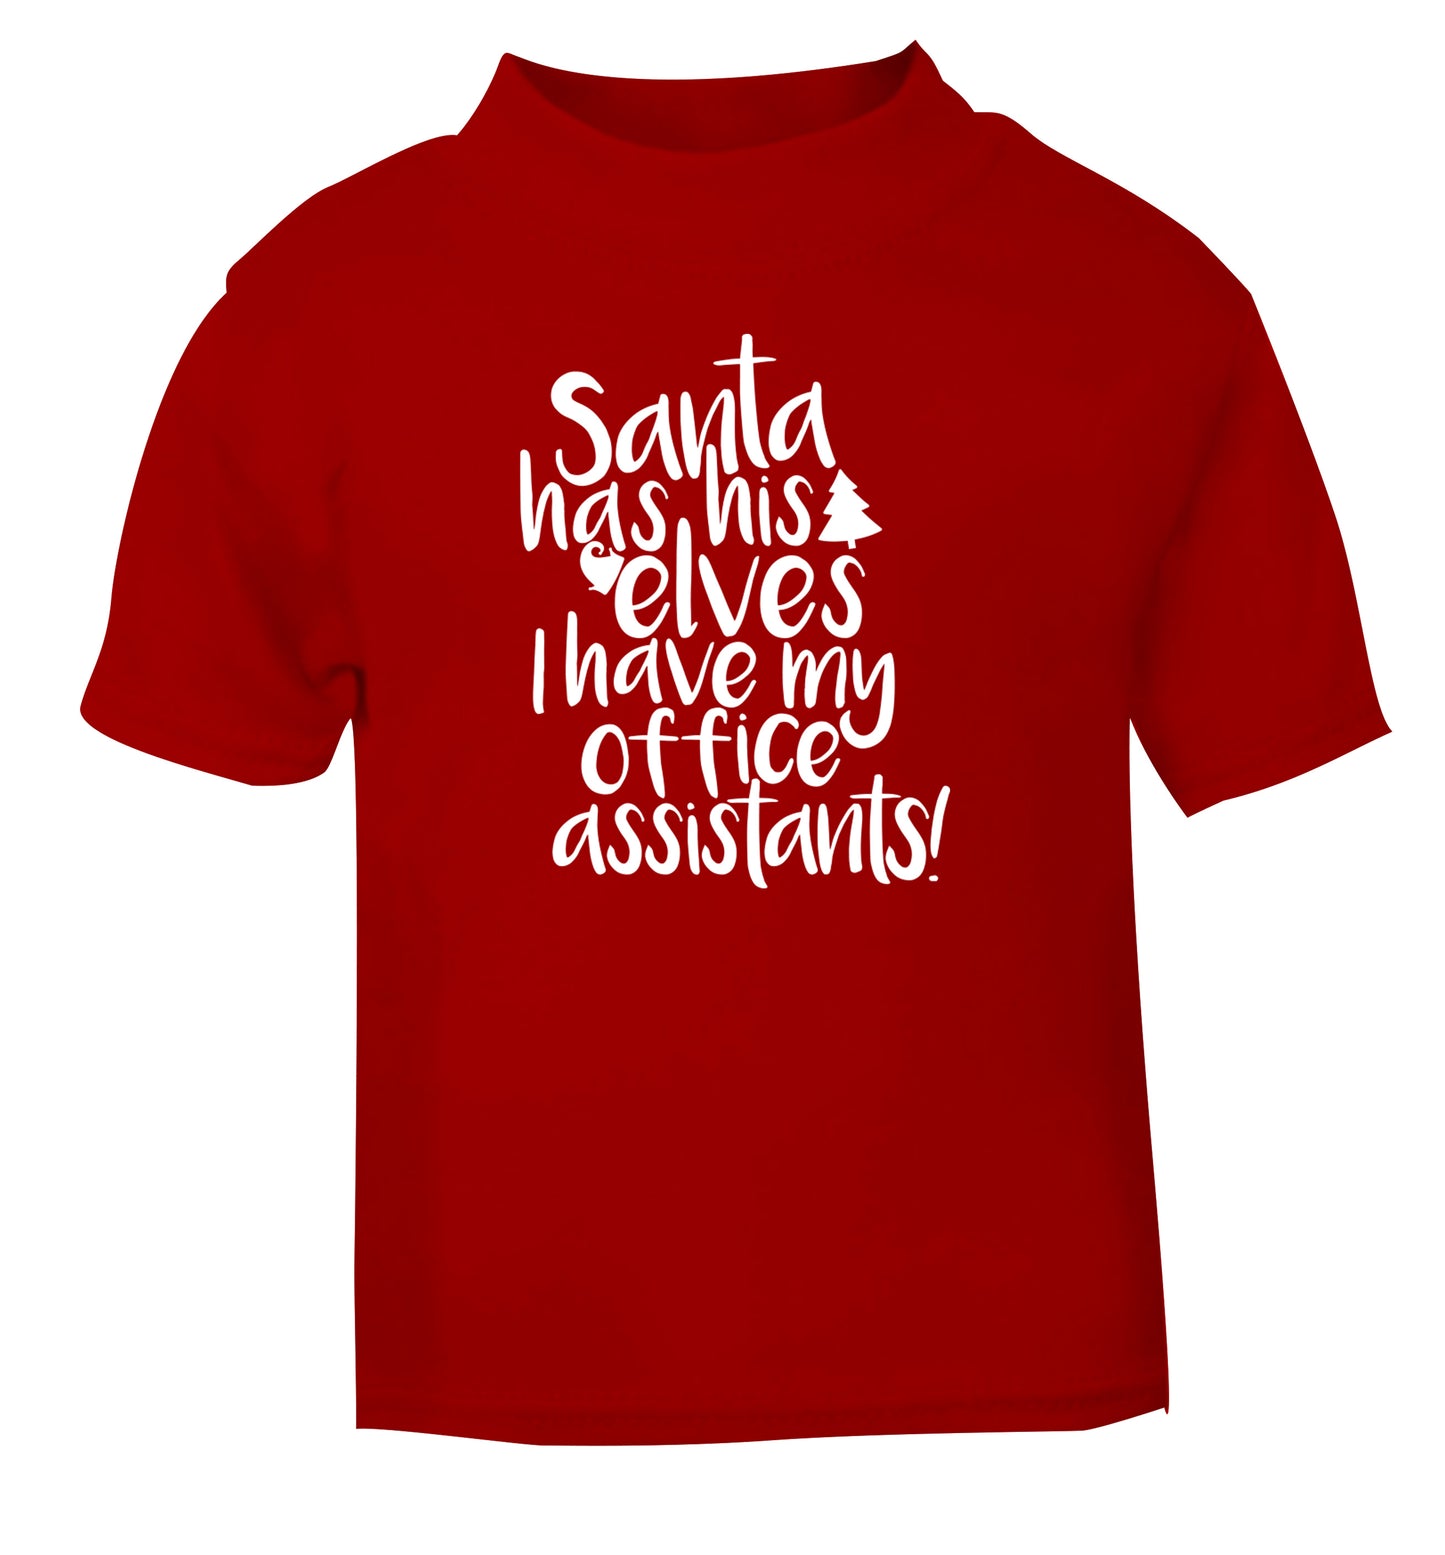 Santa has elves I have office assistants red Baby Toddler Tshirt 2 Years